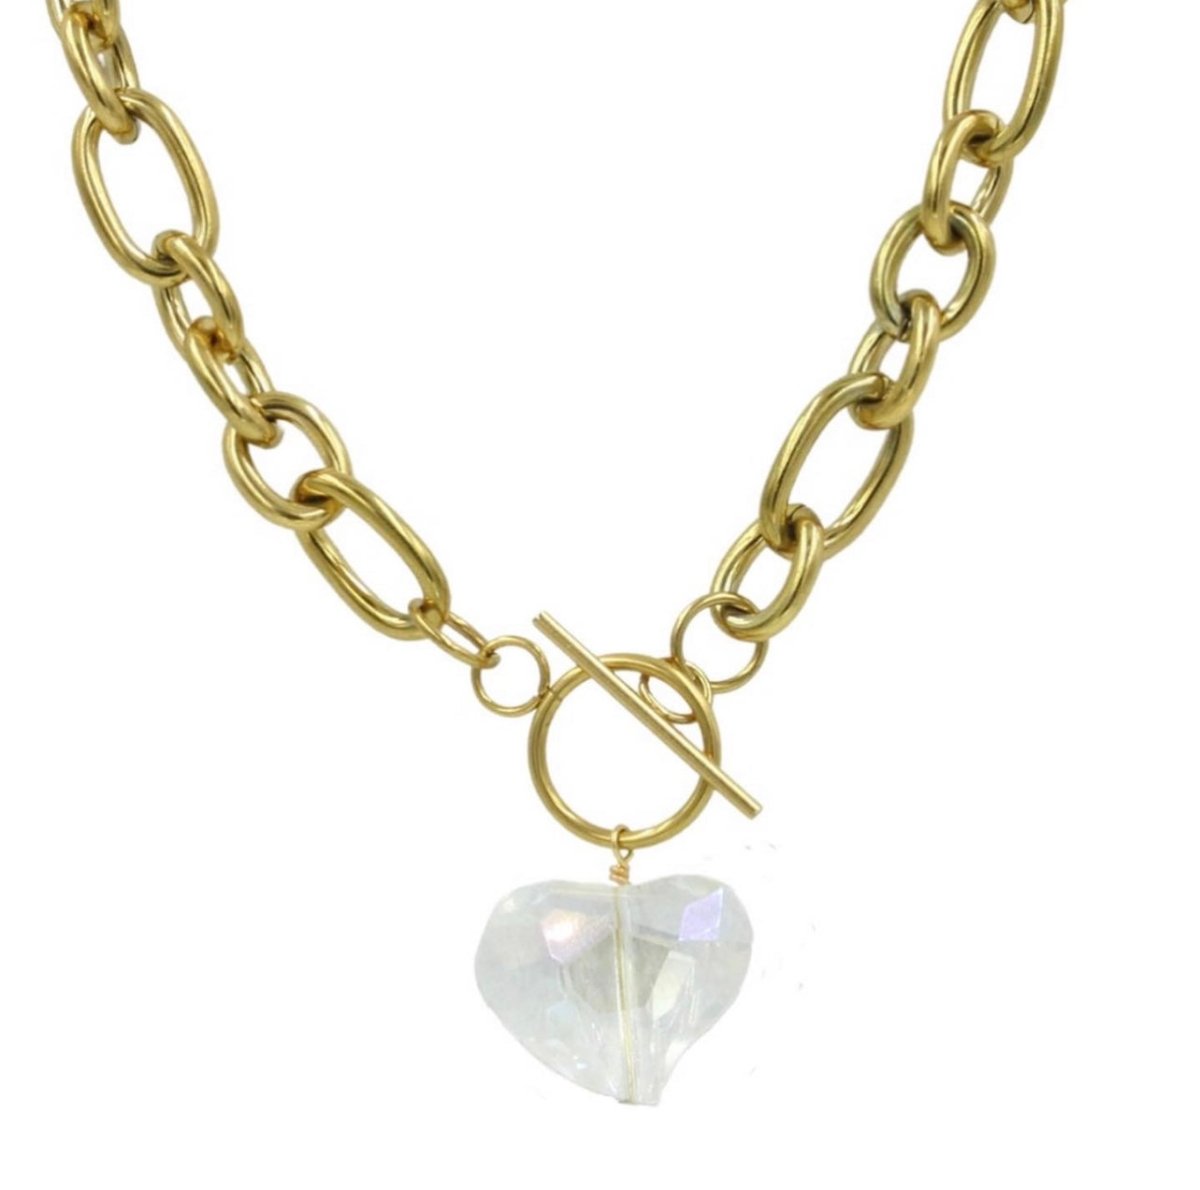 My Big Crazy Heart Chunky Chain Toggle Necklace - Sunday Girl by